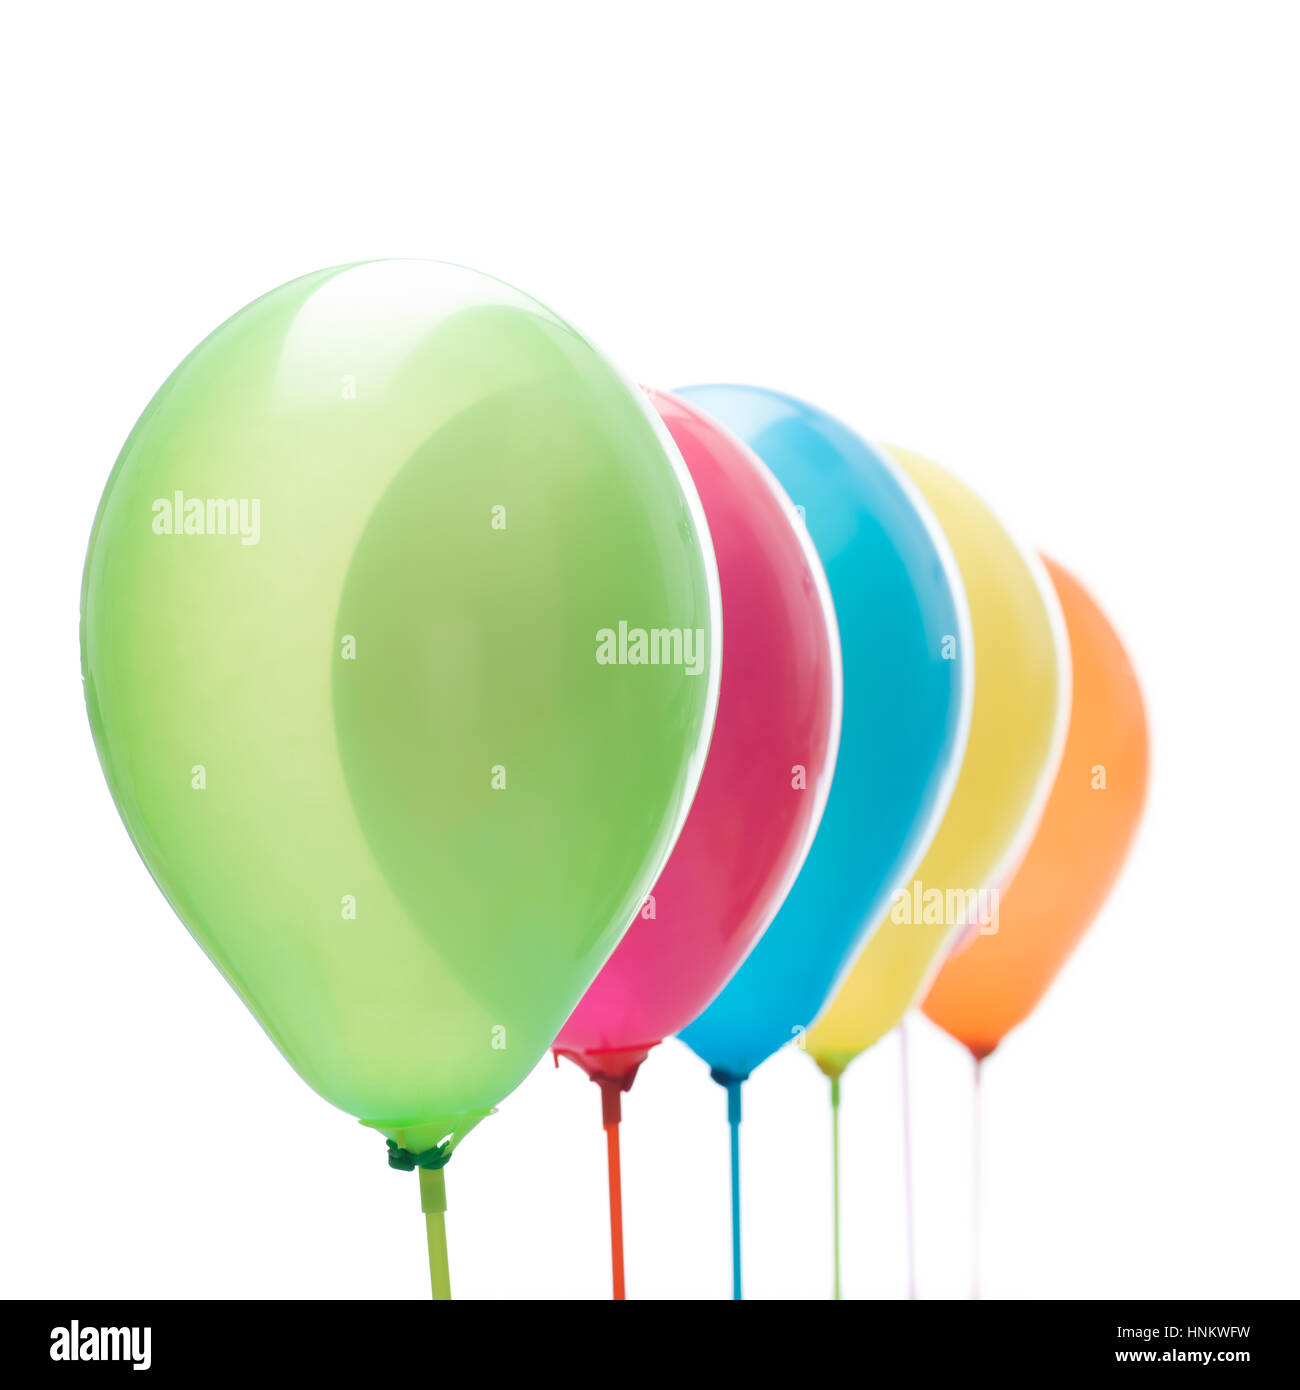 square image overlay of colorful balloons on sticks white background Stock Photo